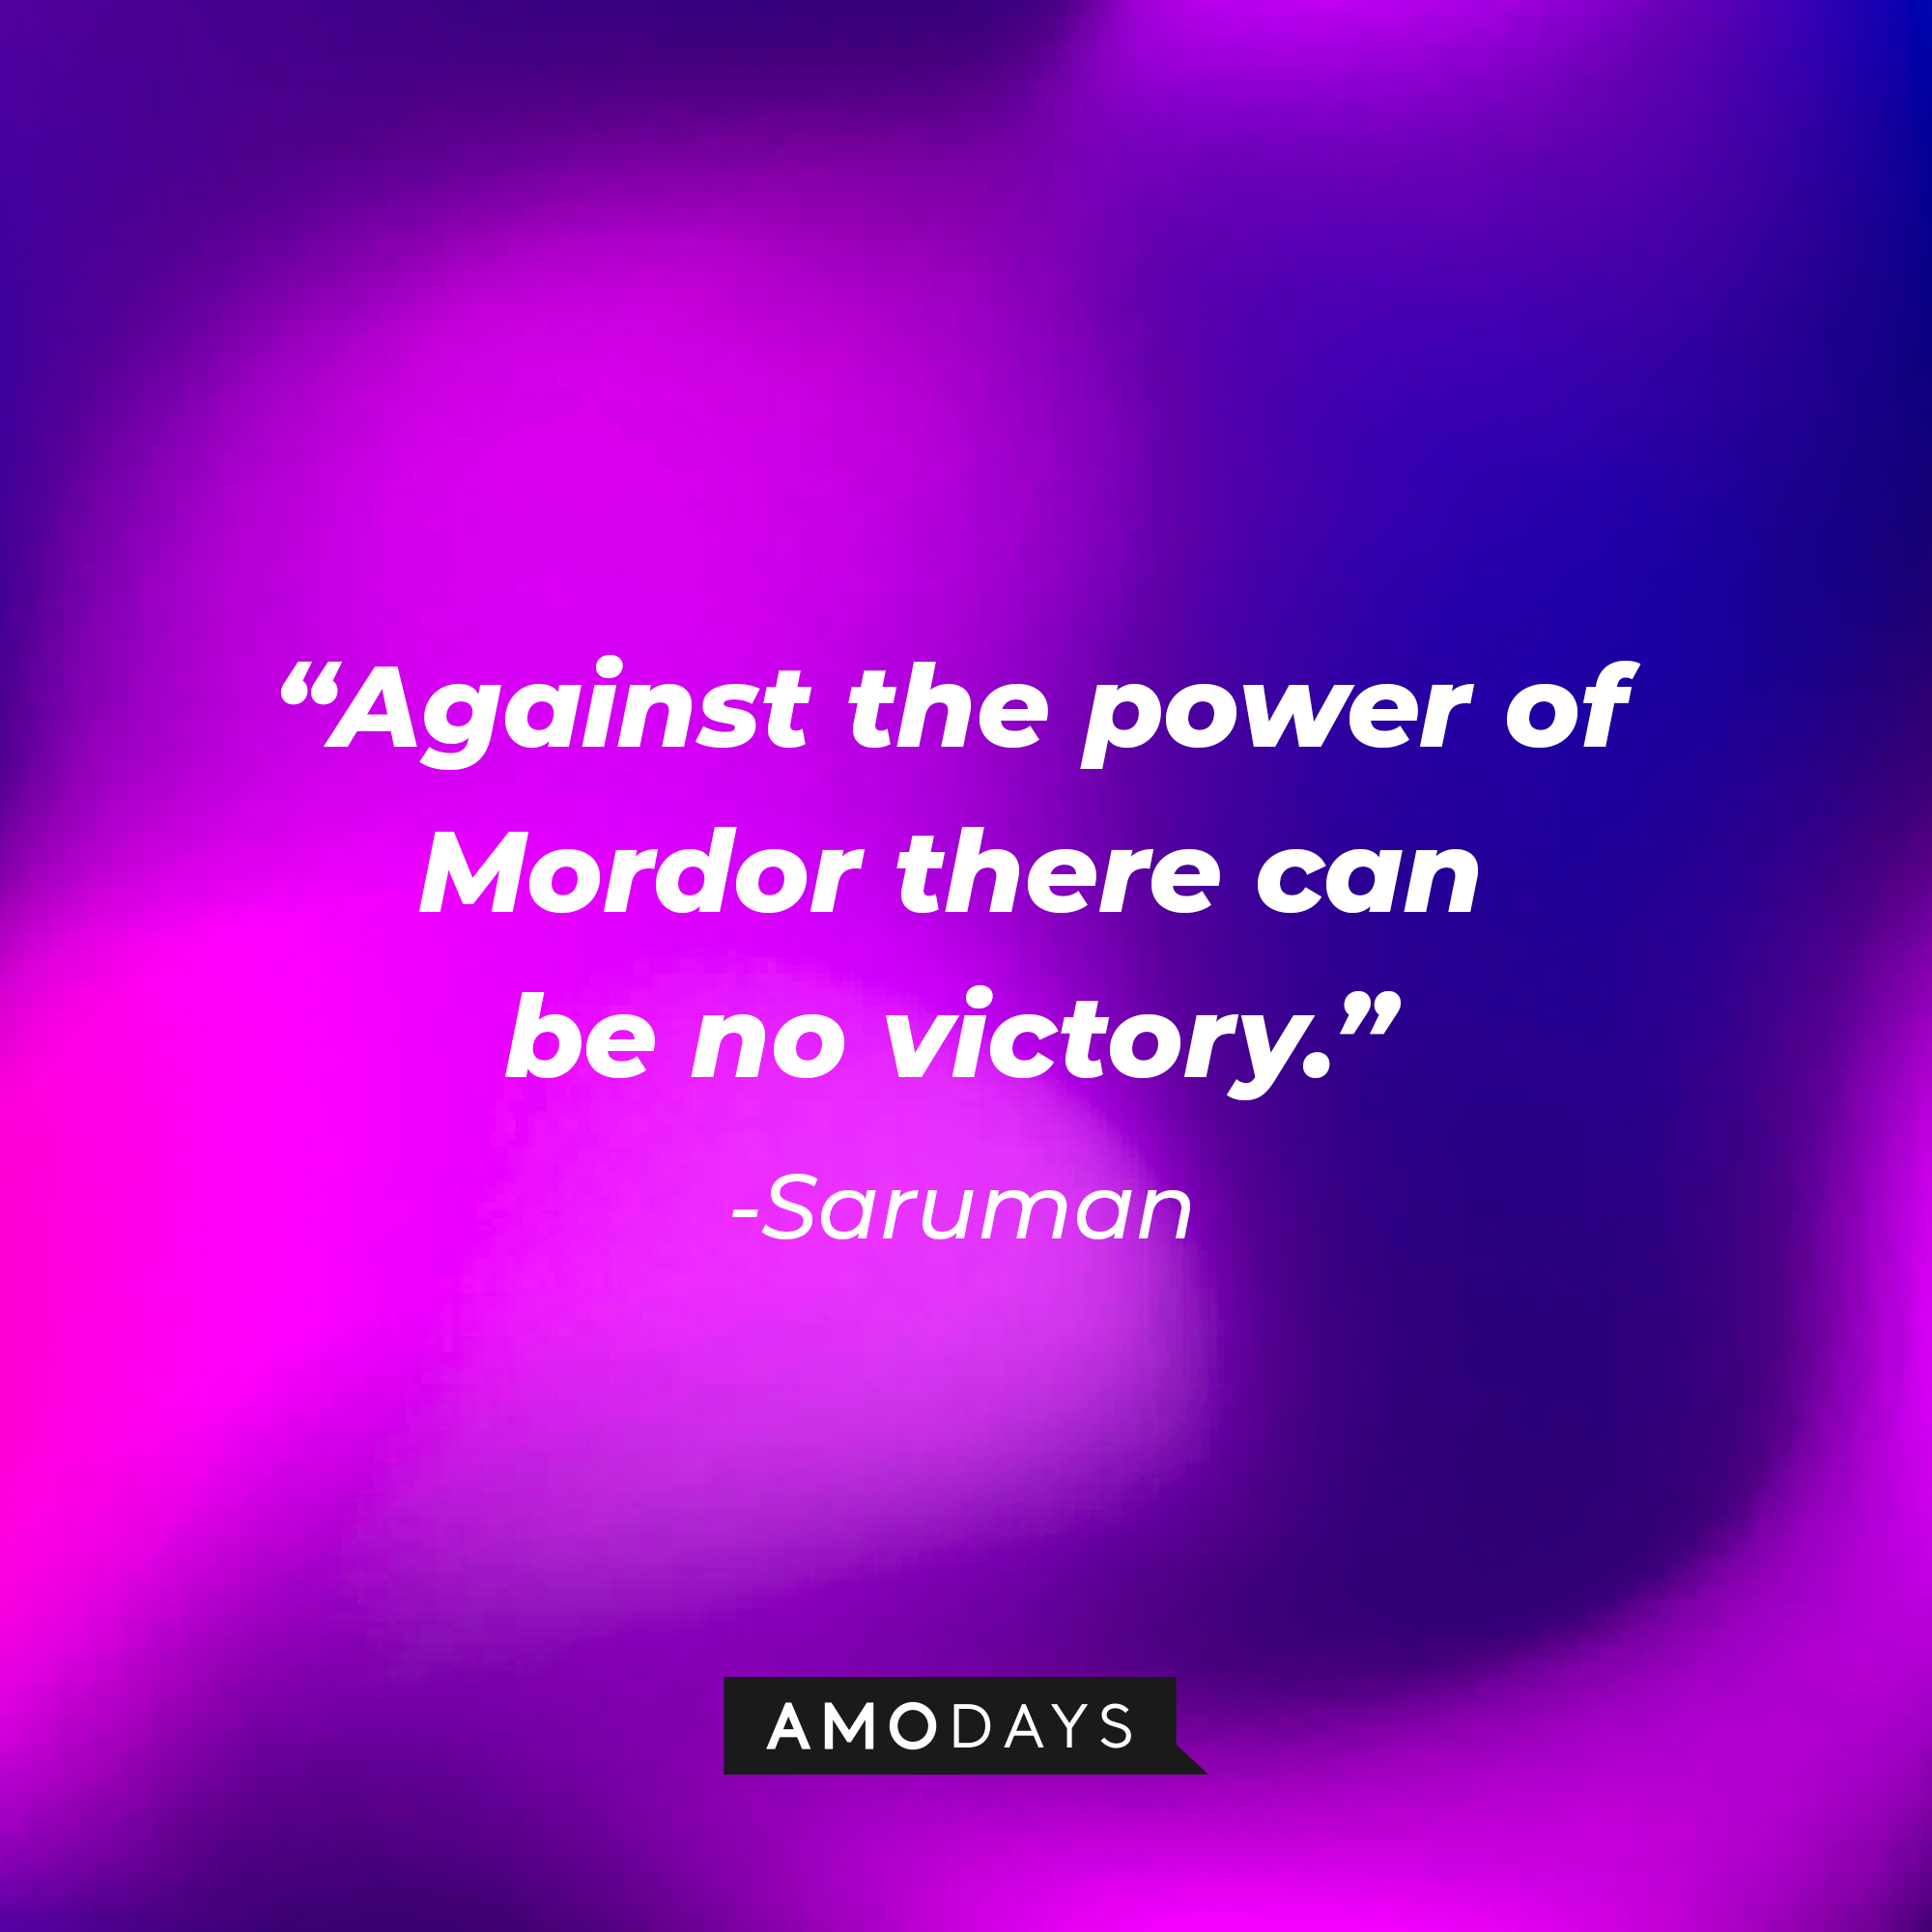 Saruman's quote: “Against the power of Mordor there can be no victory.” | Source: Amodays